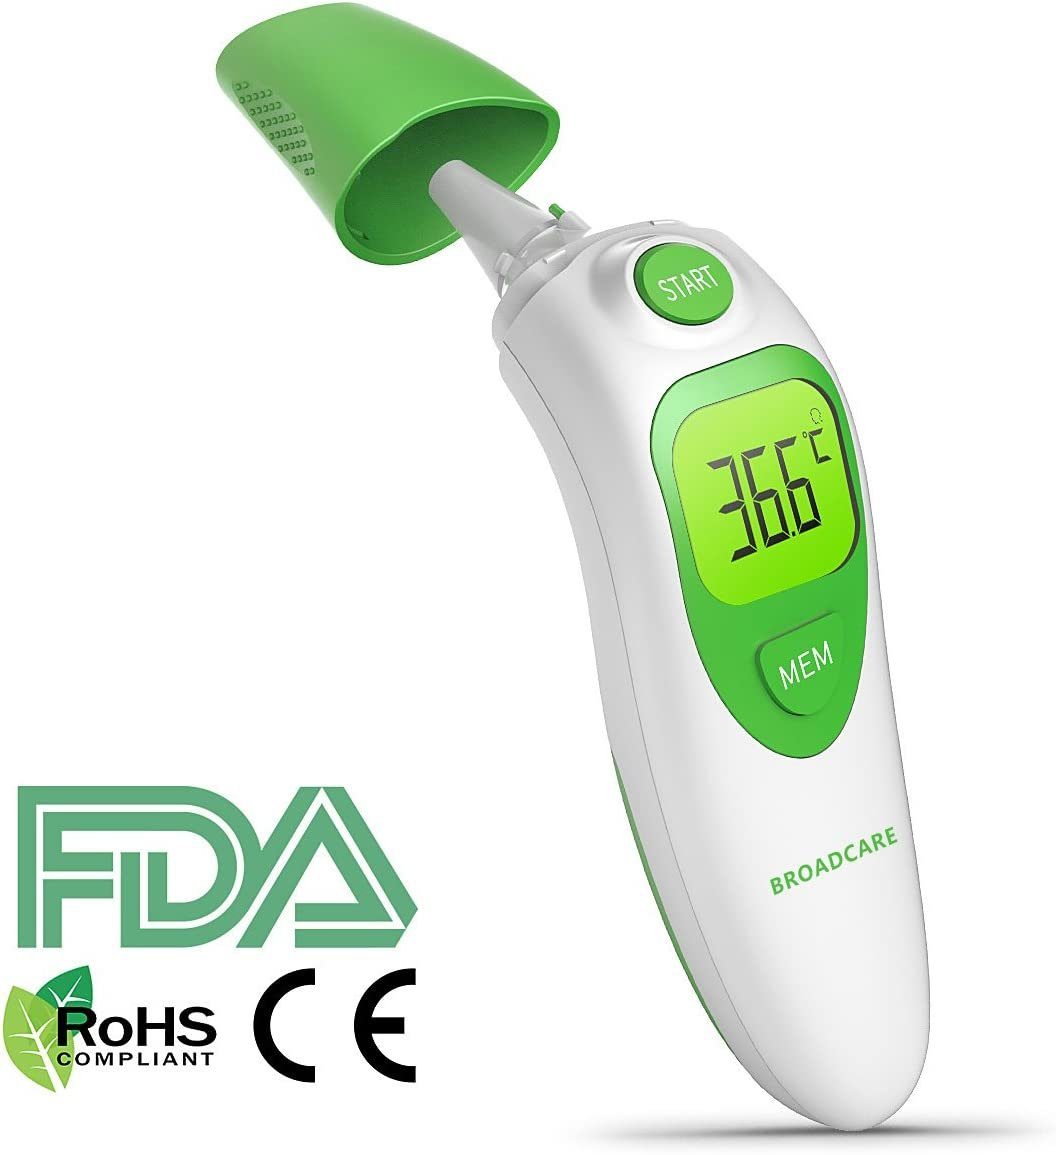 Broadcare Ohr-Fieberthermometer, 4in1 digital LCD Stirnthermometer Infrarot Ohr Fieberthermometer kontaktlos Stirn Thermometer